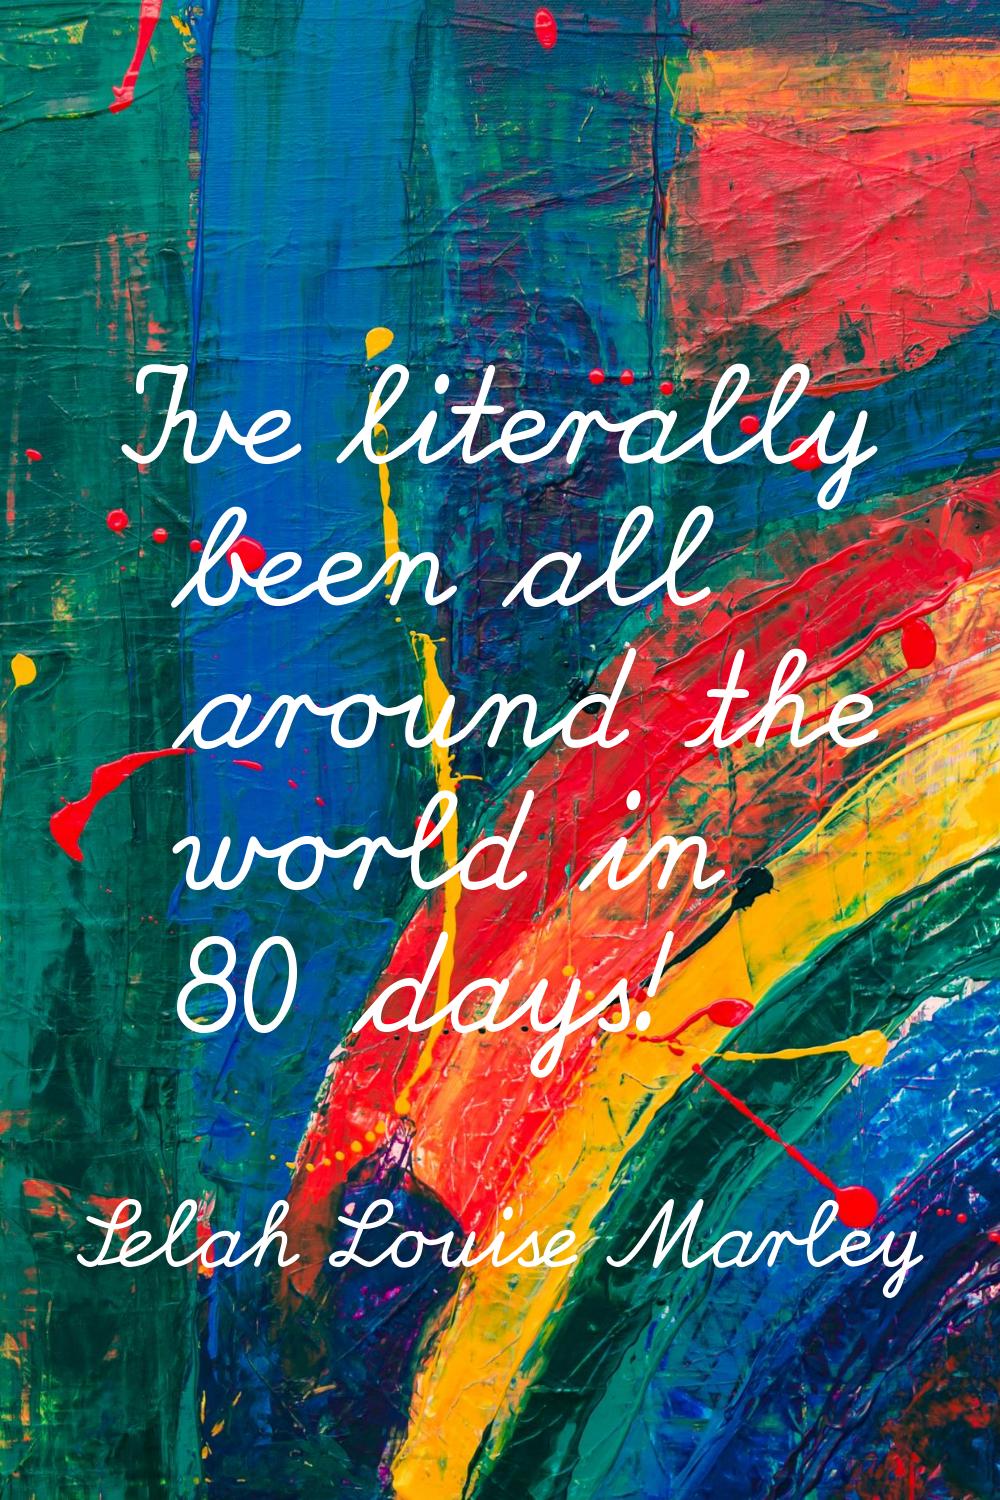 I've literally been all around the world in 80 days!